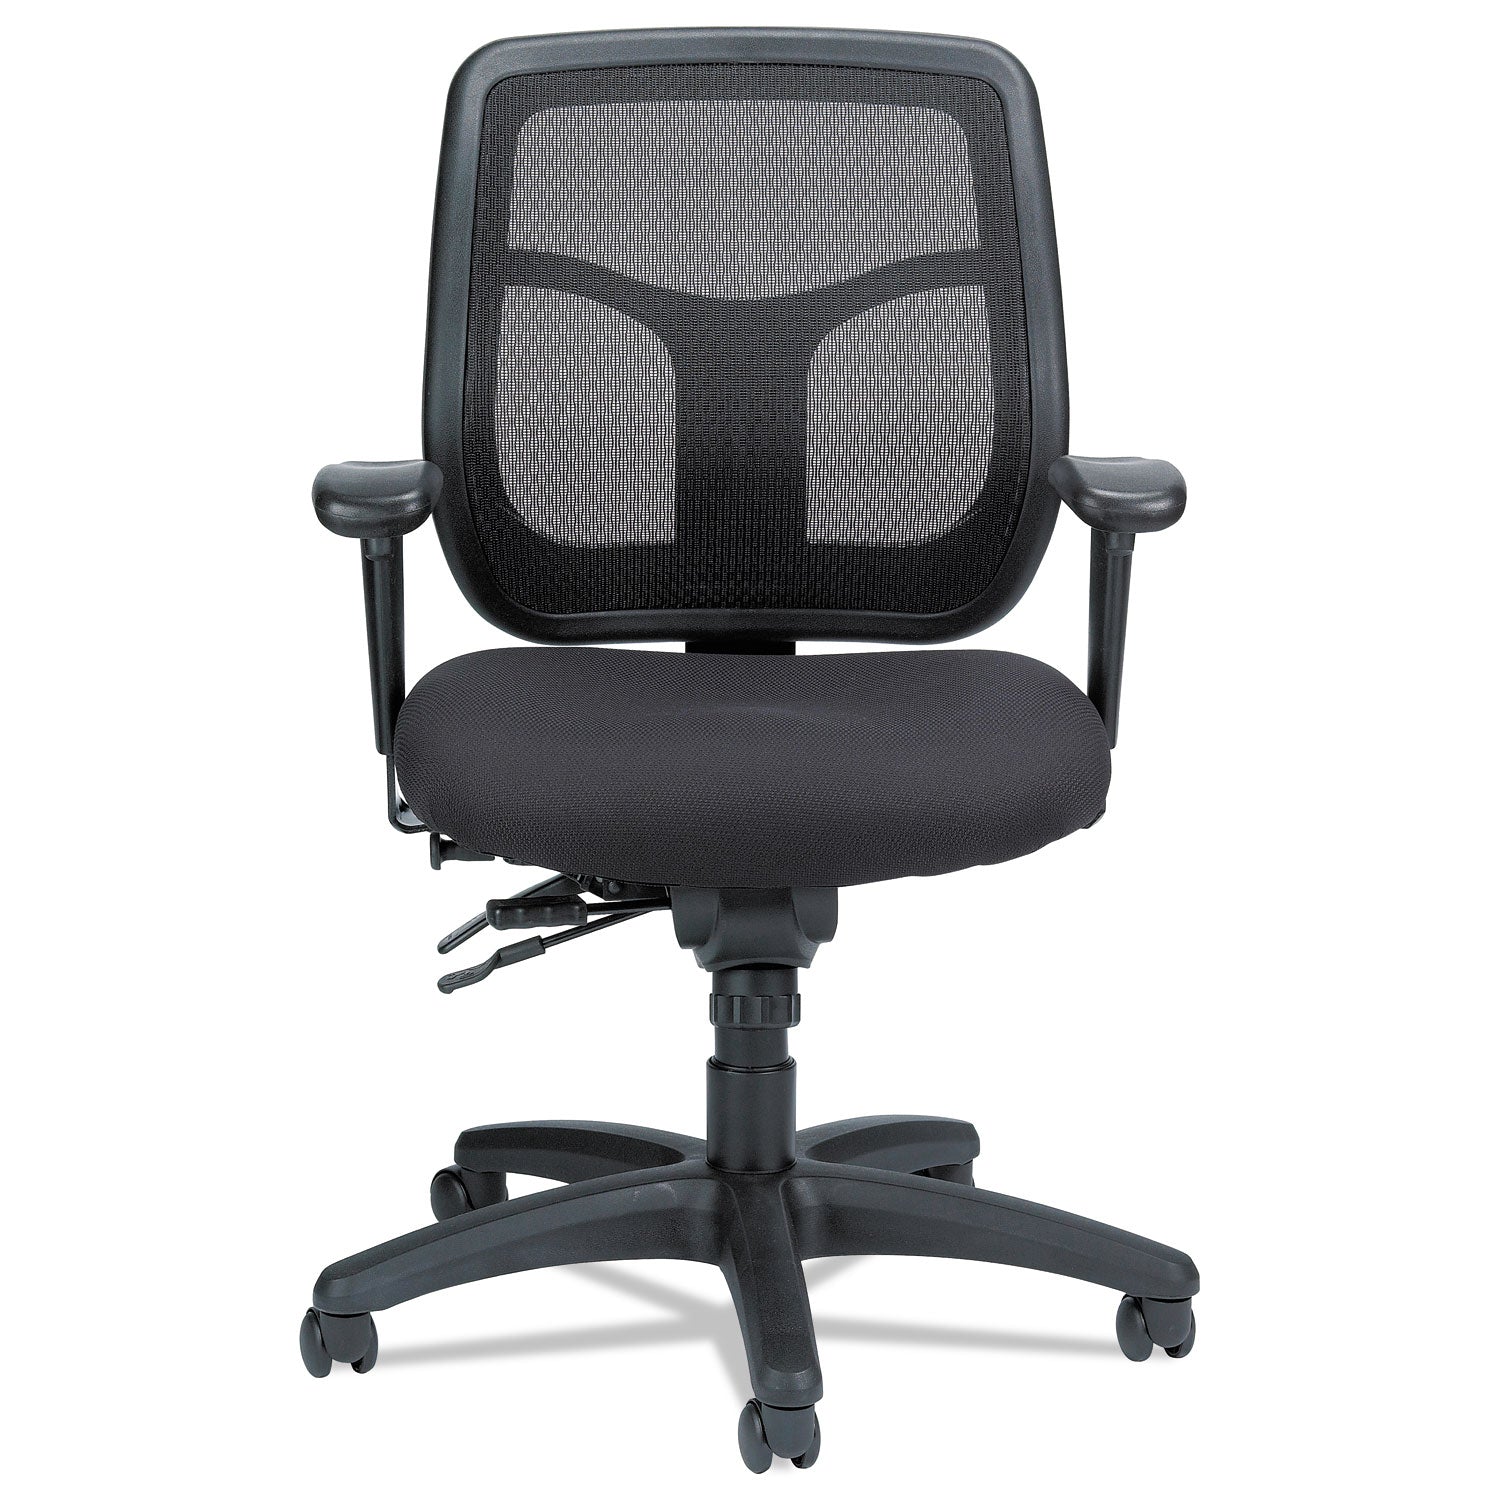 apollo-multi-function-mesh-task-chair-supports-up-to-250-lb-189-to-224-seat-height-silver-seat-back-black-base_eutmft945sl - 1